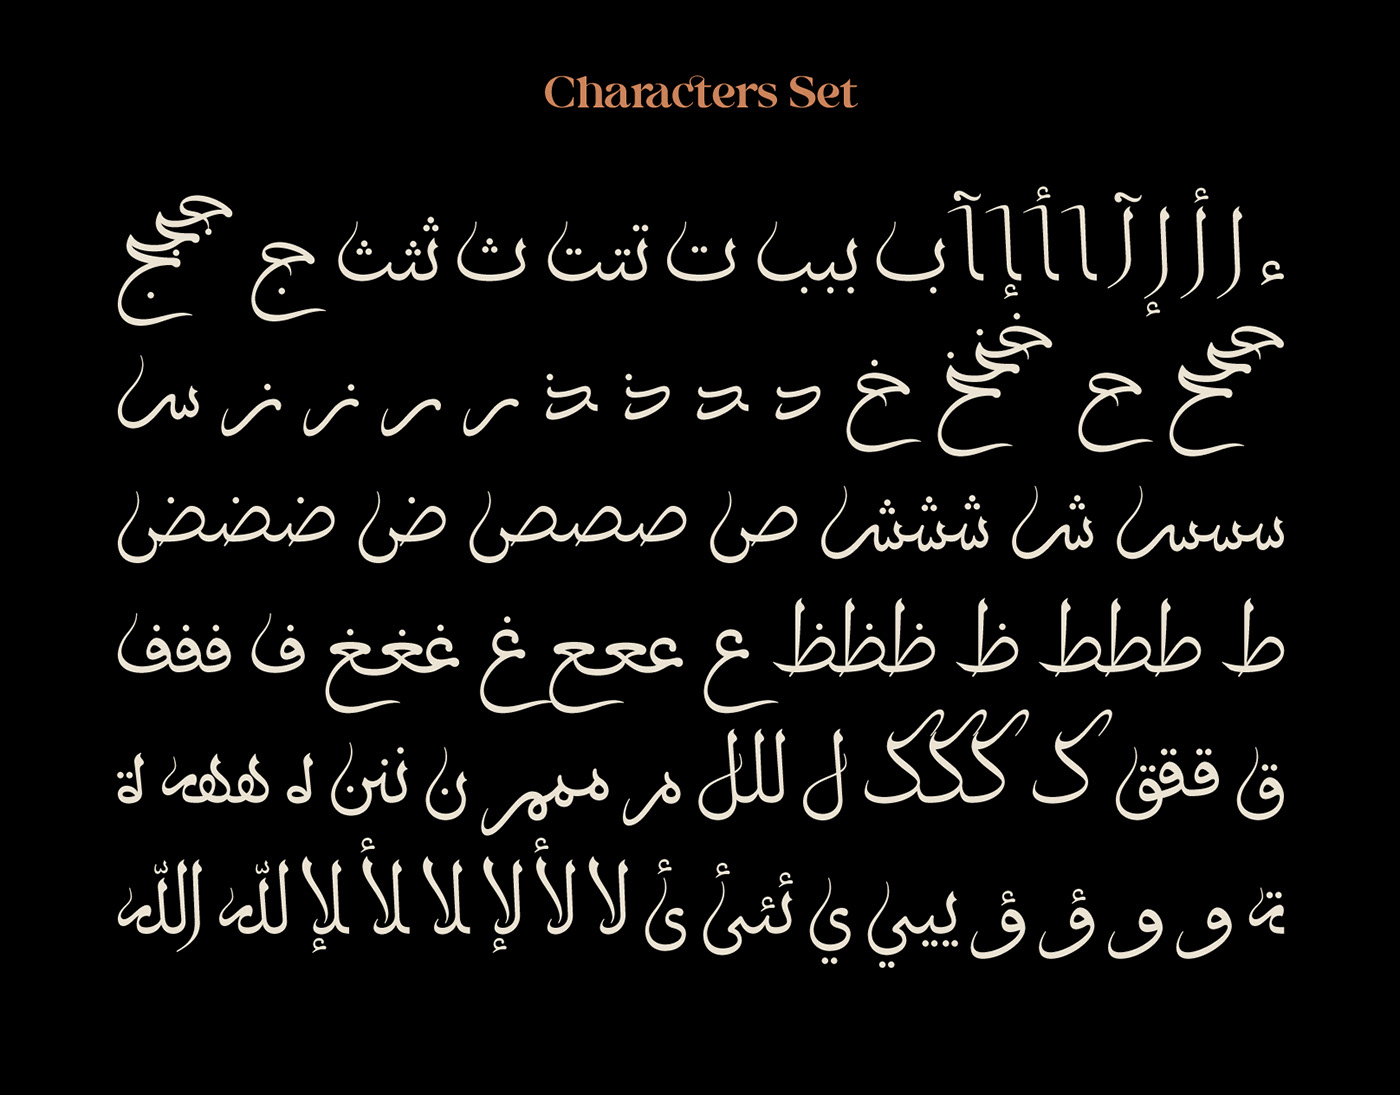 arabic font Display display font fonts Maghrib thuluth tsfonts type design Typeface خط عربي